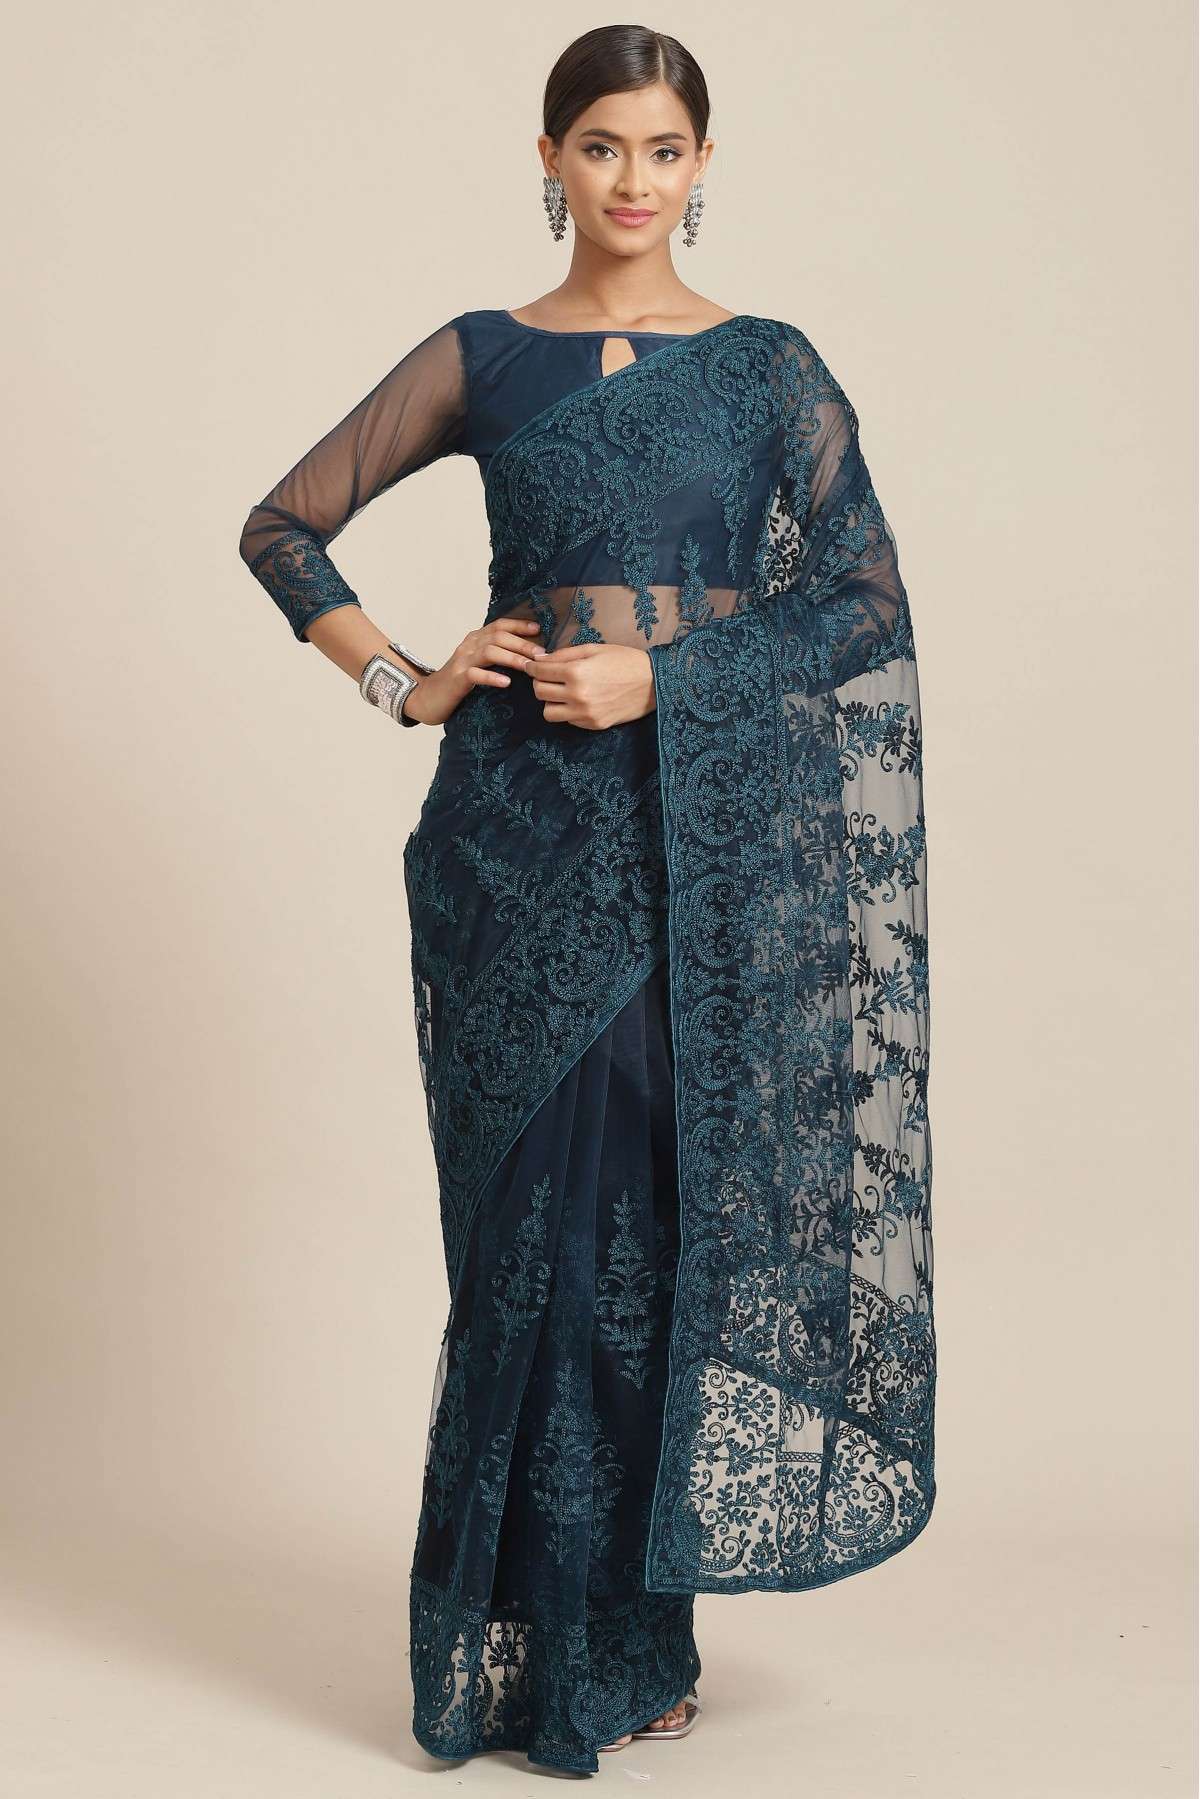 Net Embroidery Saree In Teal Blue Colour - SR5415853